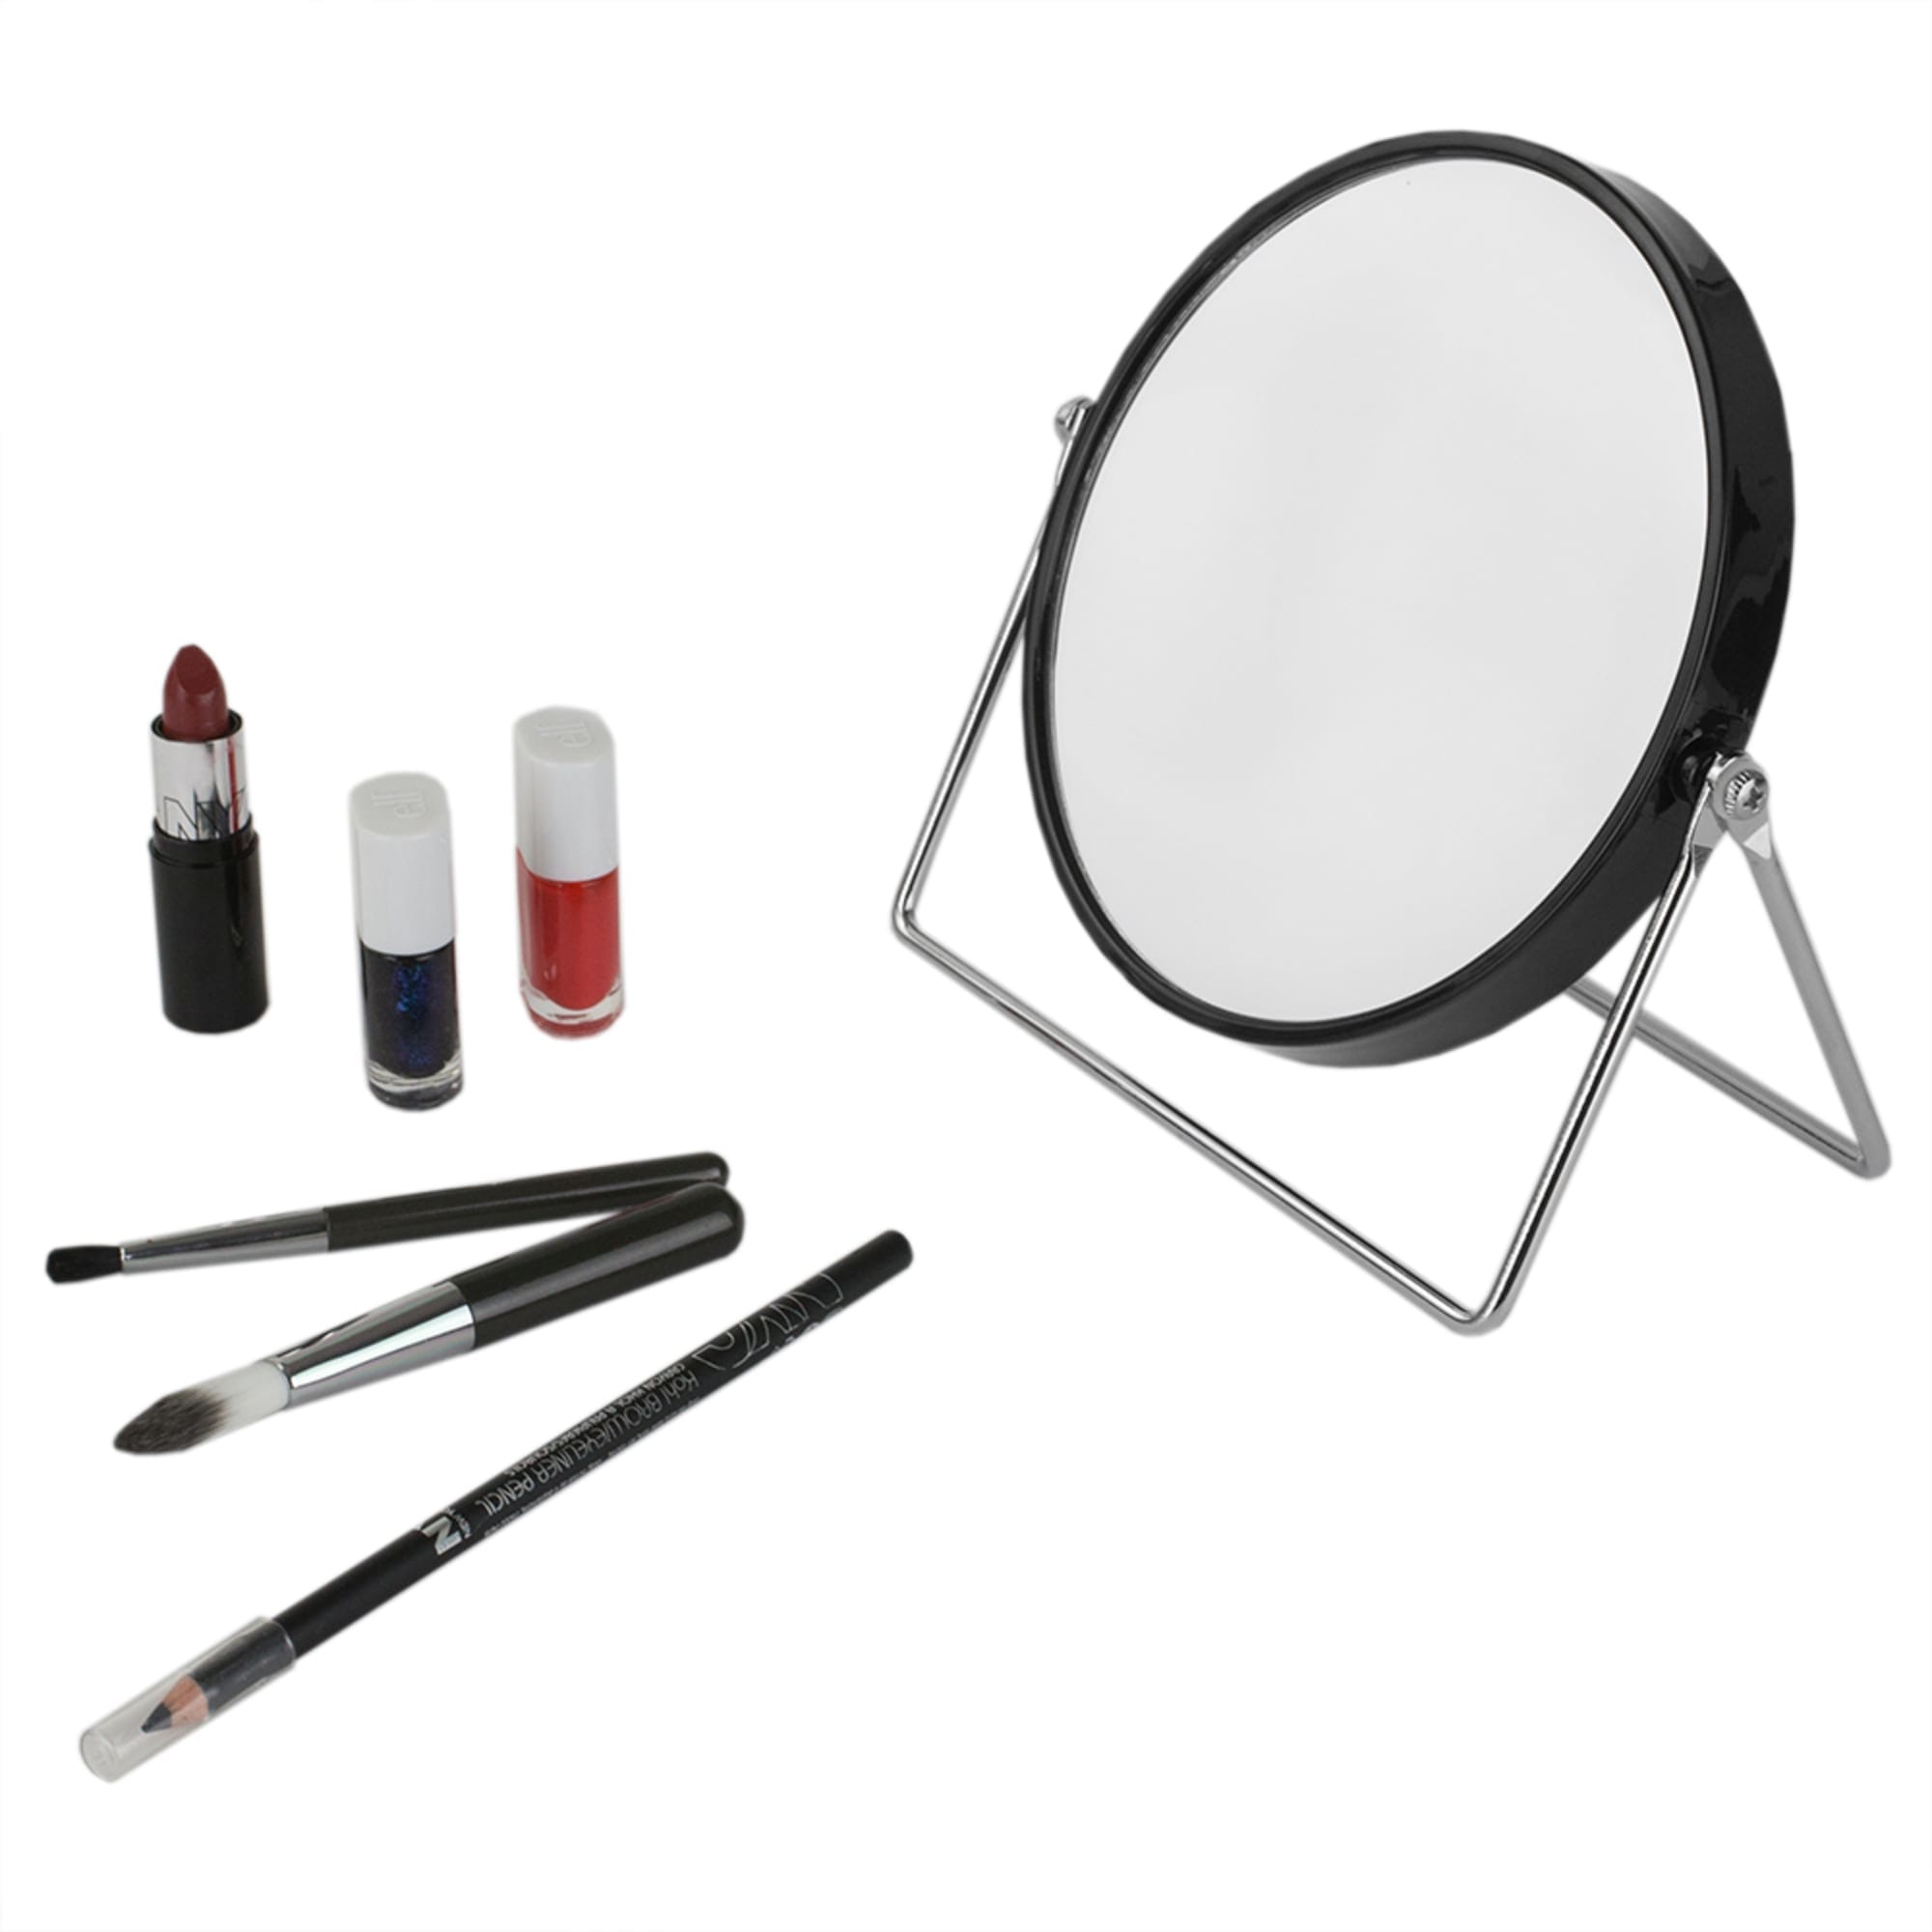 Home Basics Double Sided Decorative Cosmetic Mirror with Sleek Stand $5.00 EACH, CASE PACK OF 12